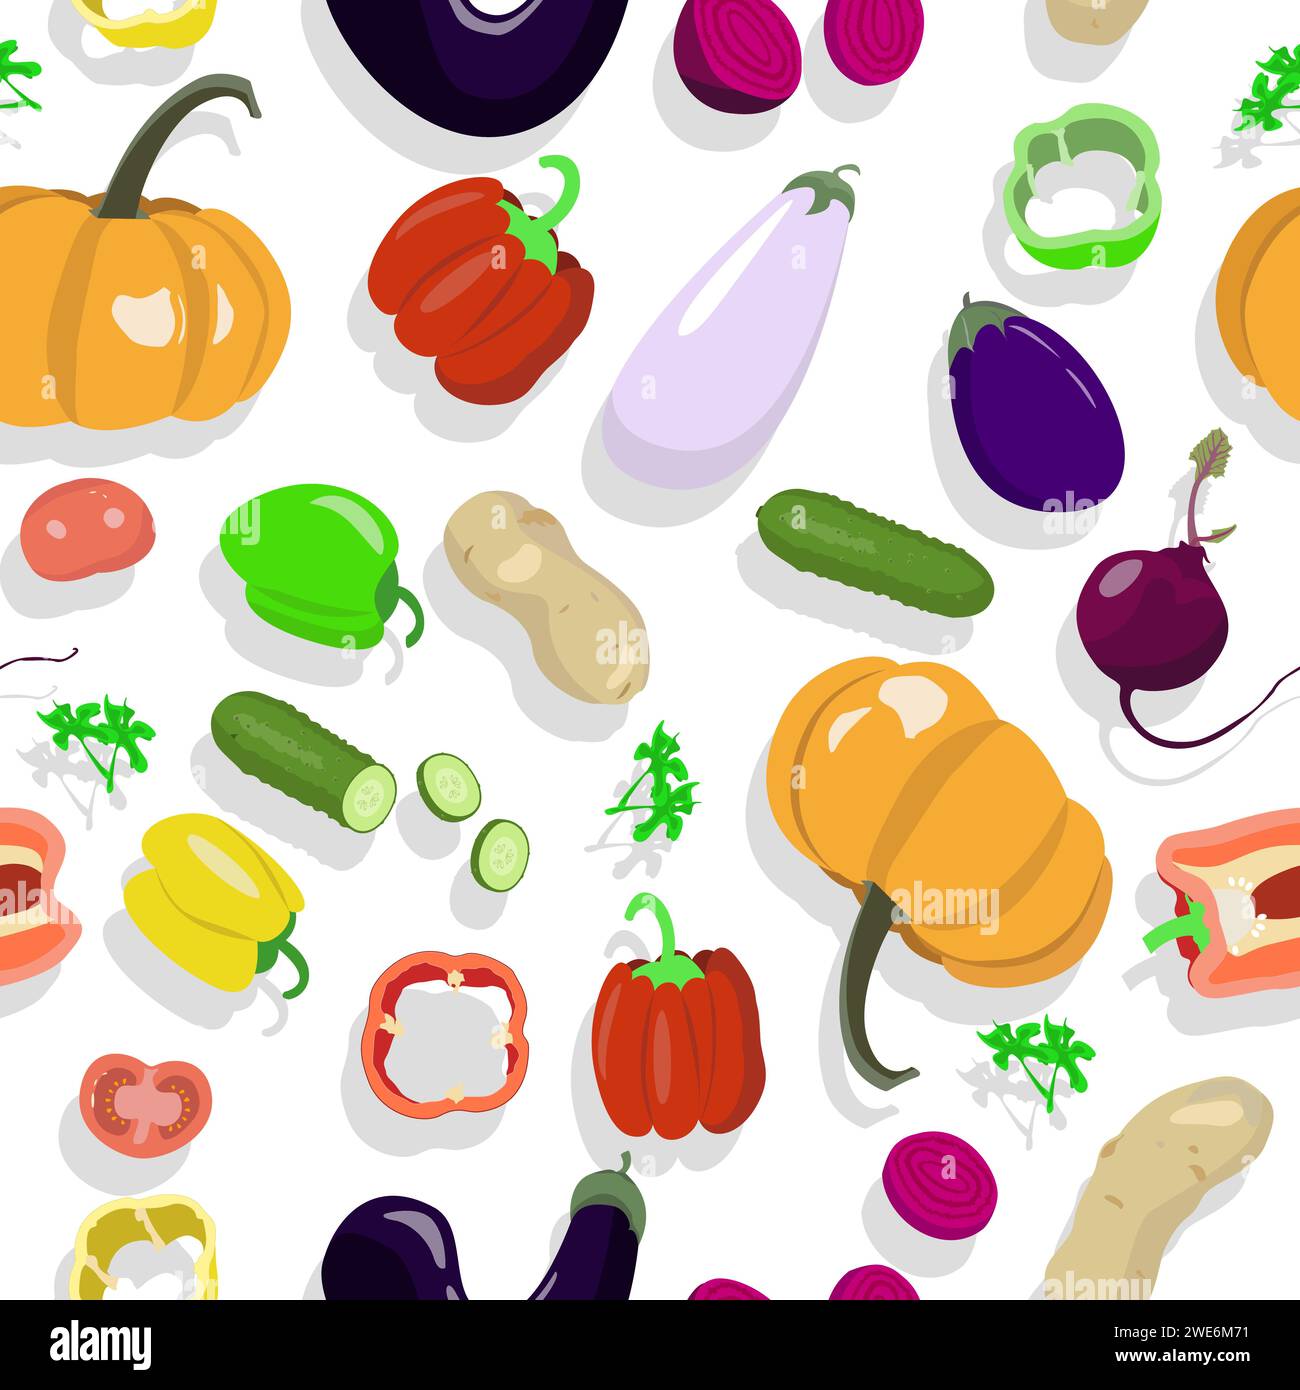 Vegetables and their slices seamless pattern in cartoon style Stock Vector